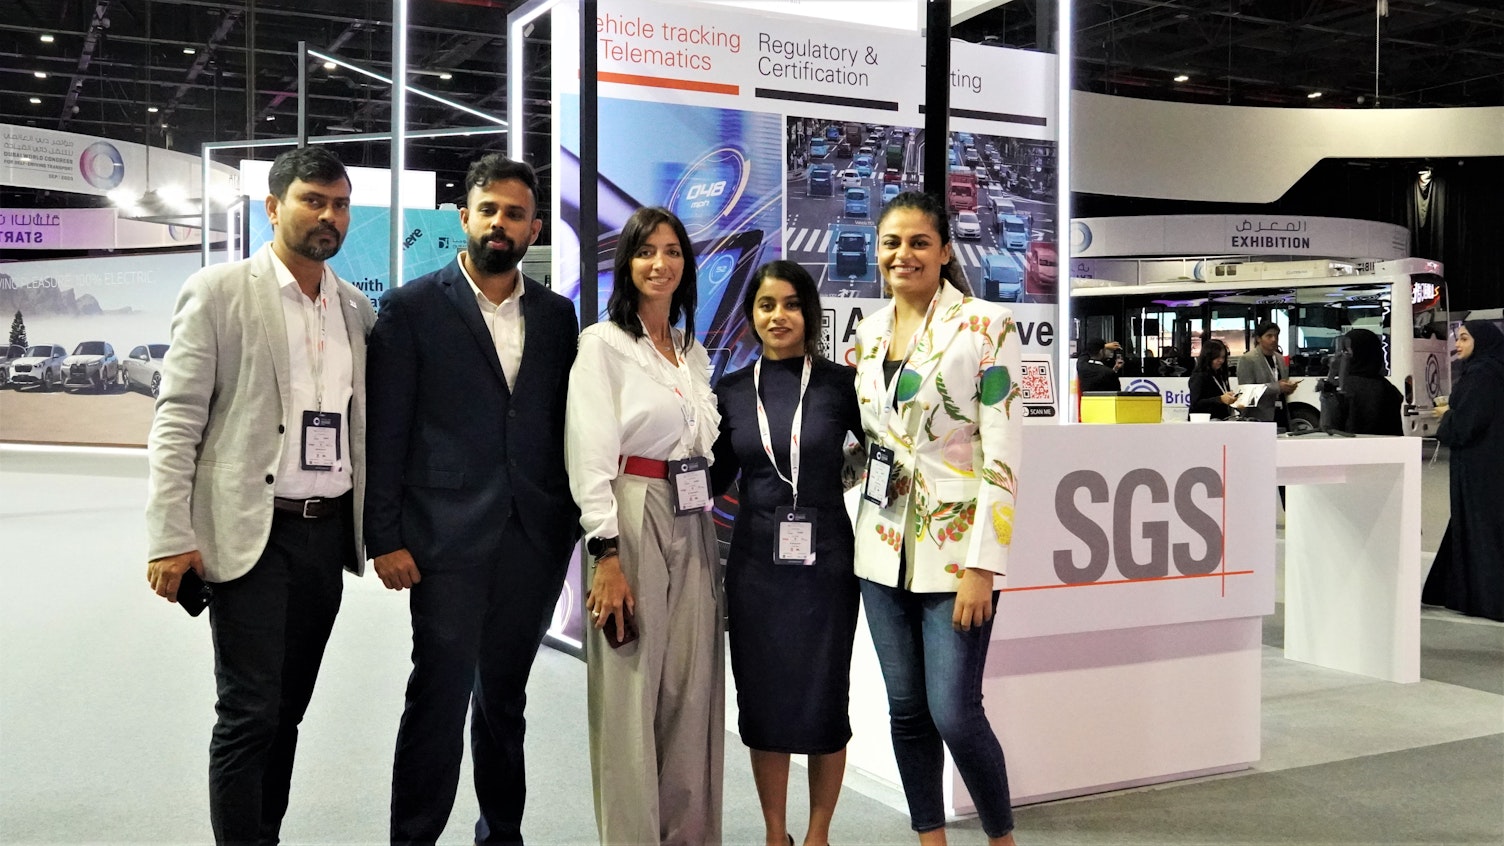 SGS Showcased Smart City Solutions at the Dubai World Congress for Self-Driving Transport